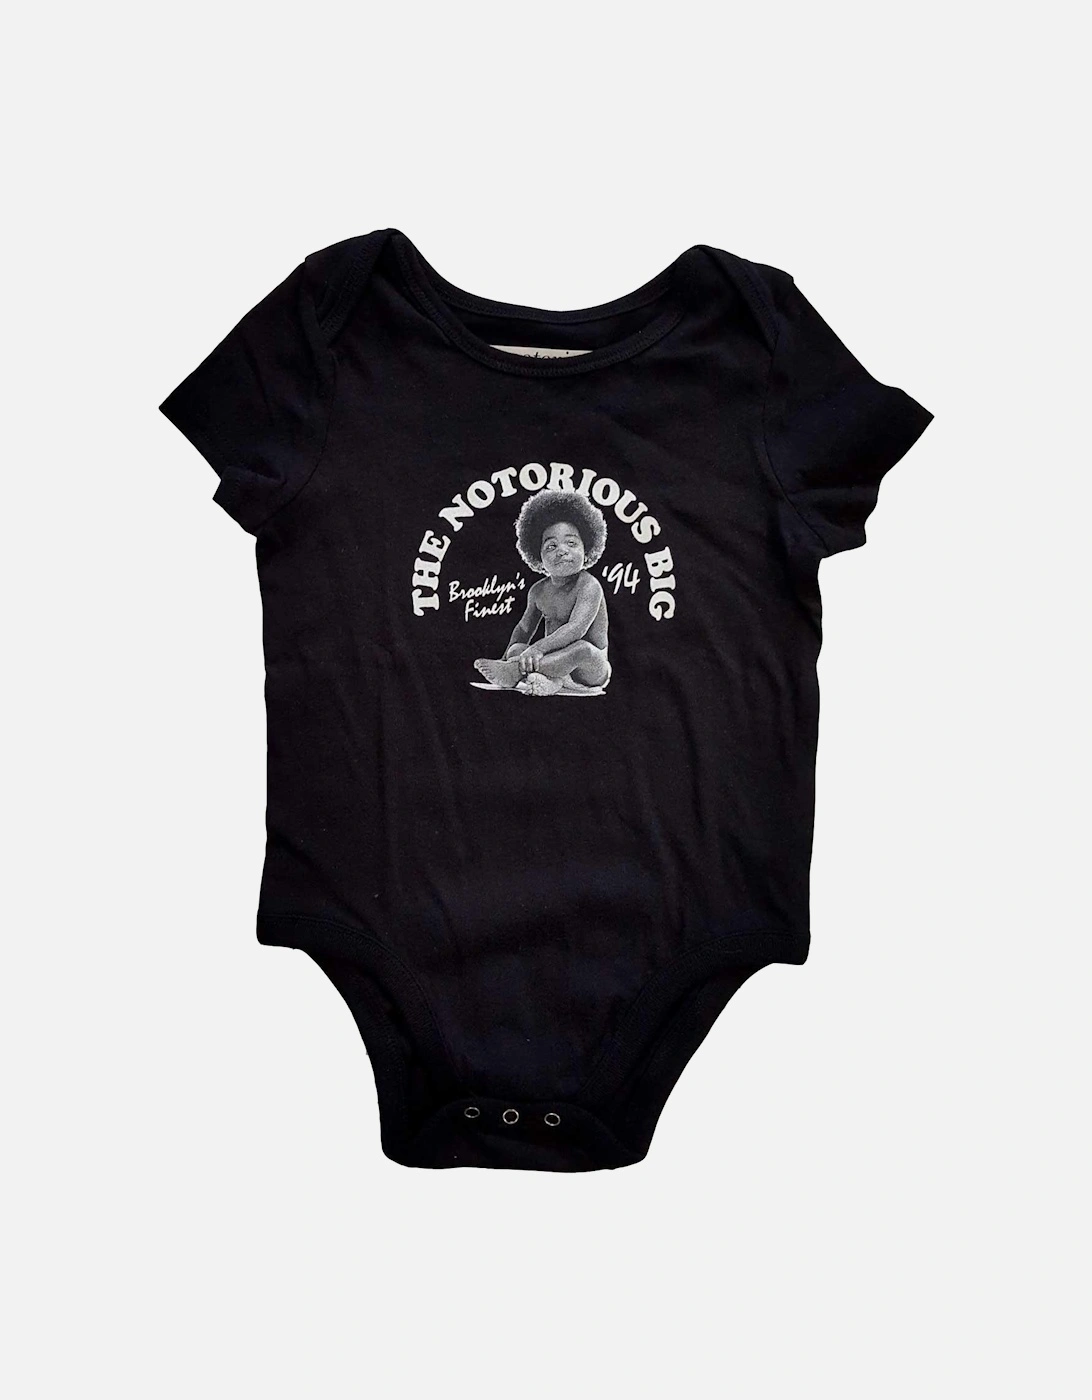 Notorious B.I.G. Baby Brooklyn?'s Finest 94 Babygrow, 2 of 1